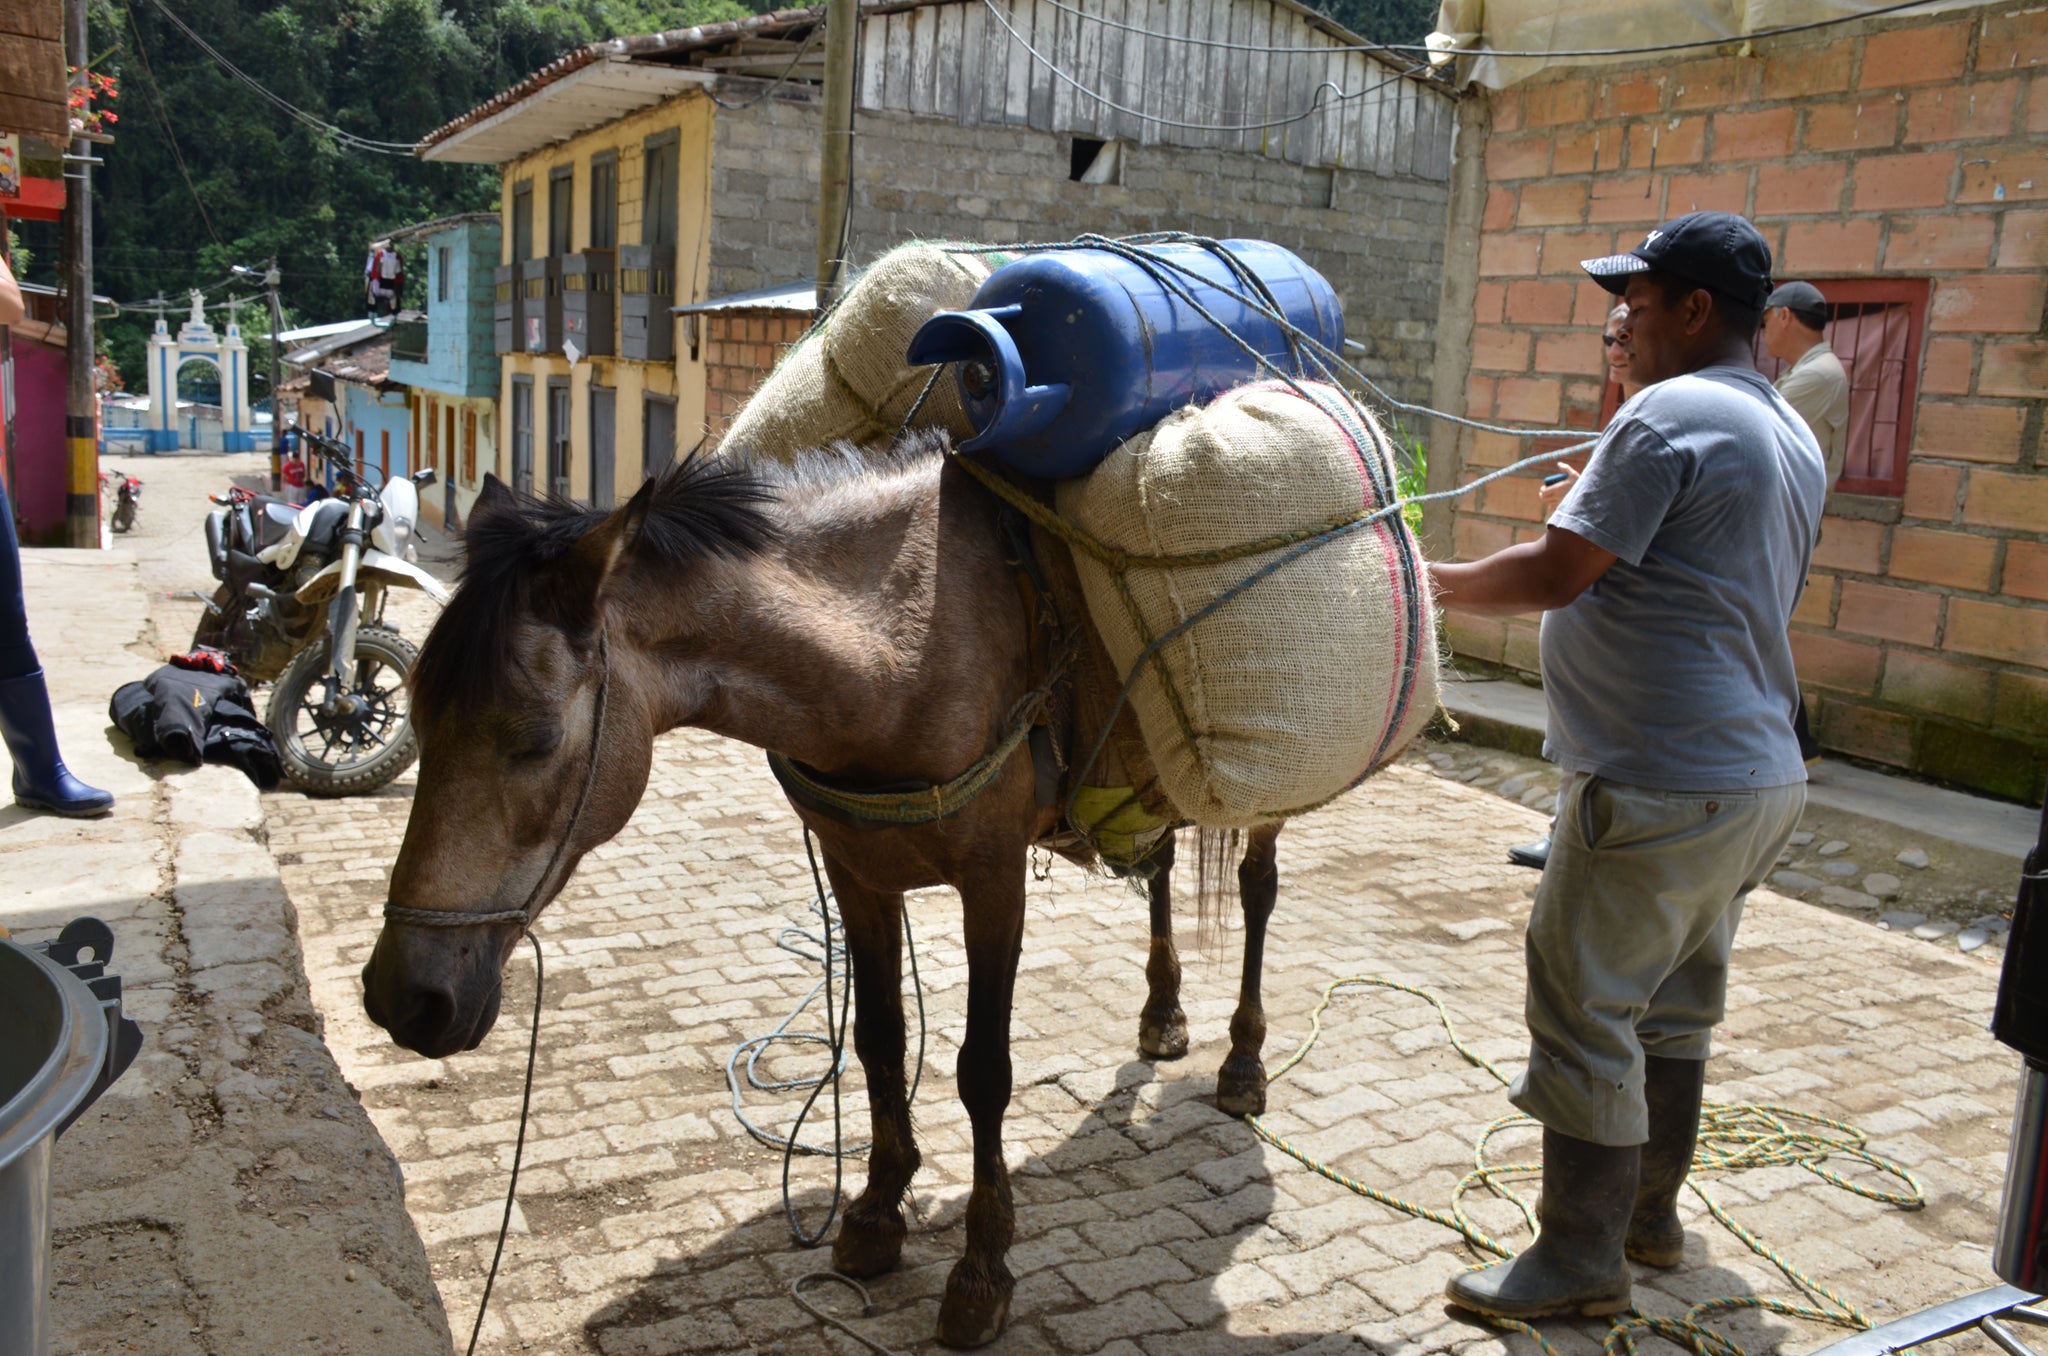 A donkey with coffee bags tethered to its back